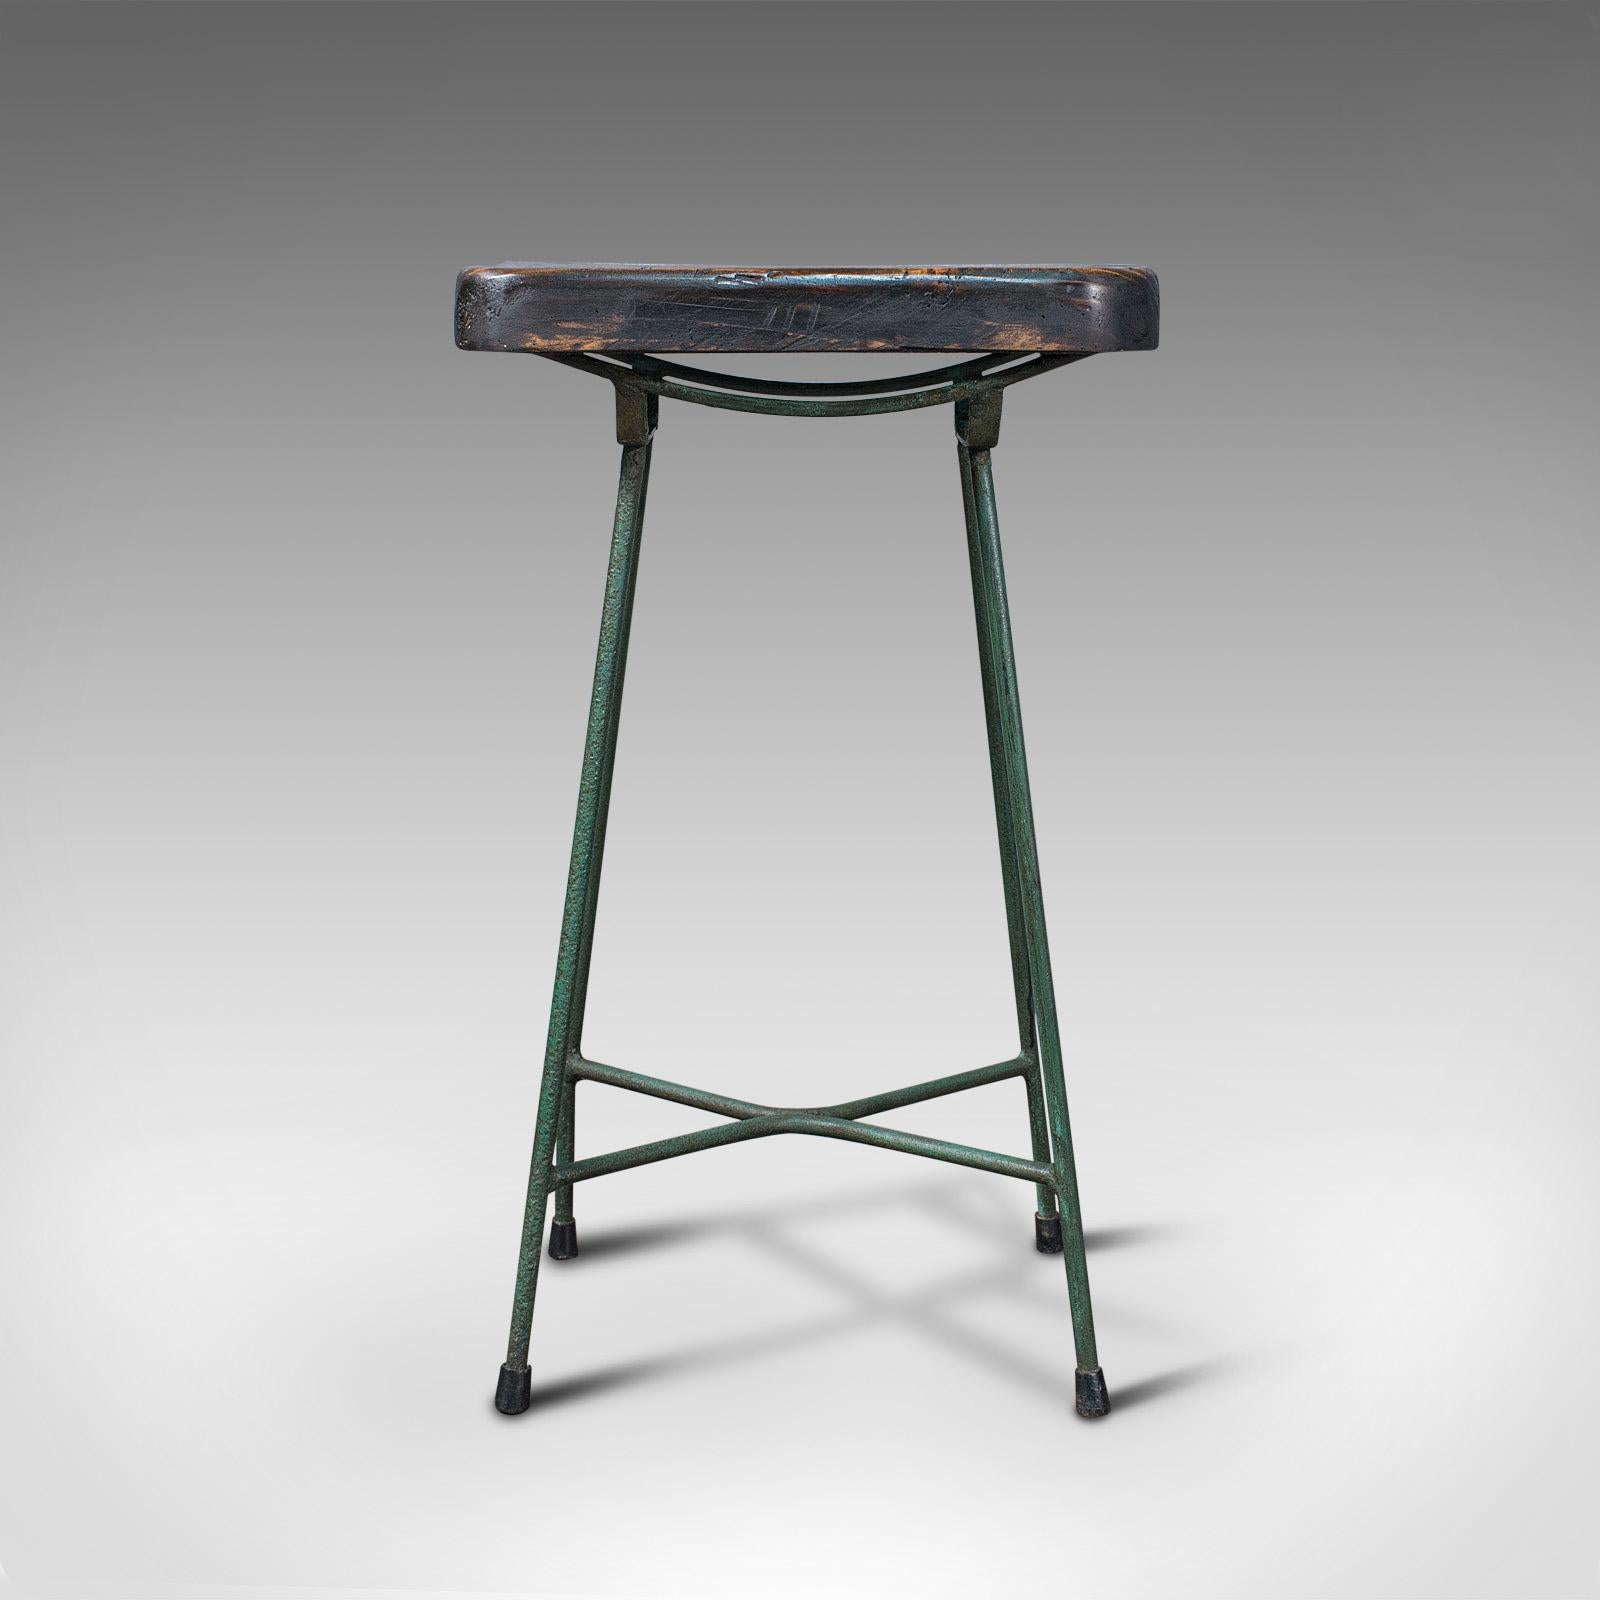 British Vintage Munitions Factory Stool, English, Pine, Industrial Taste, Lab Seat, 1940 For Sale